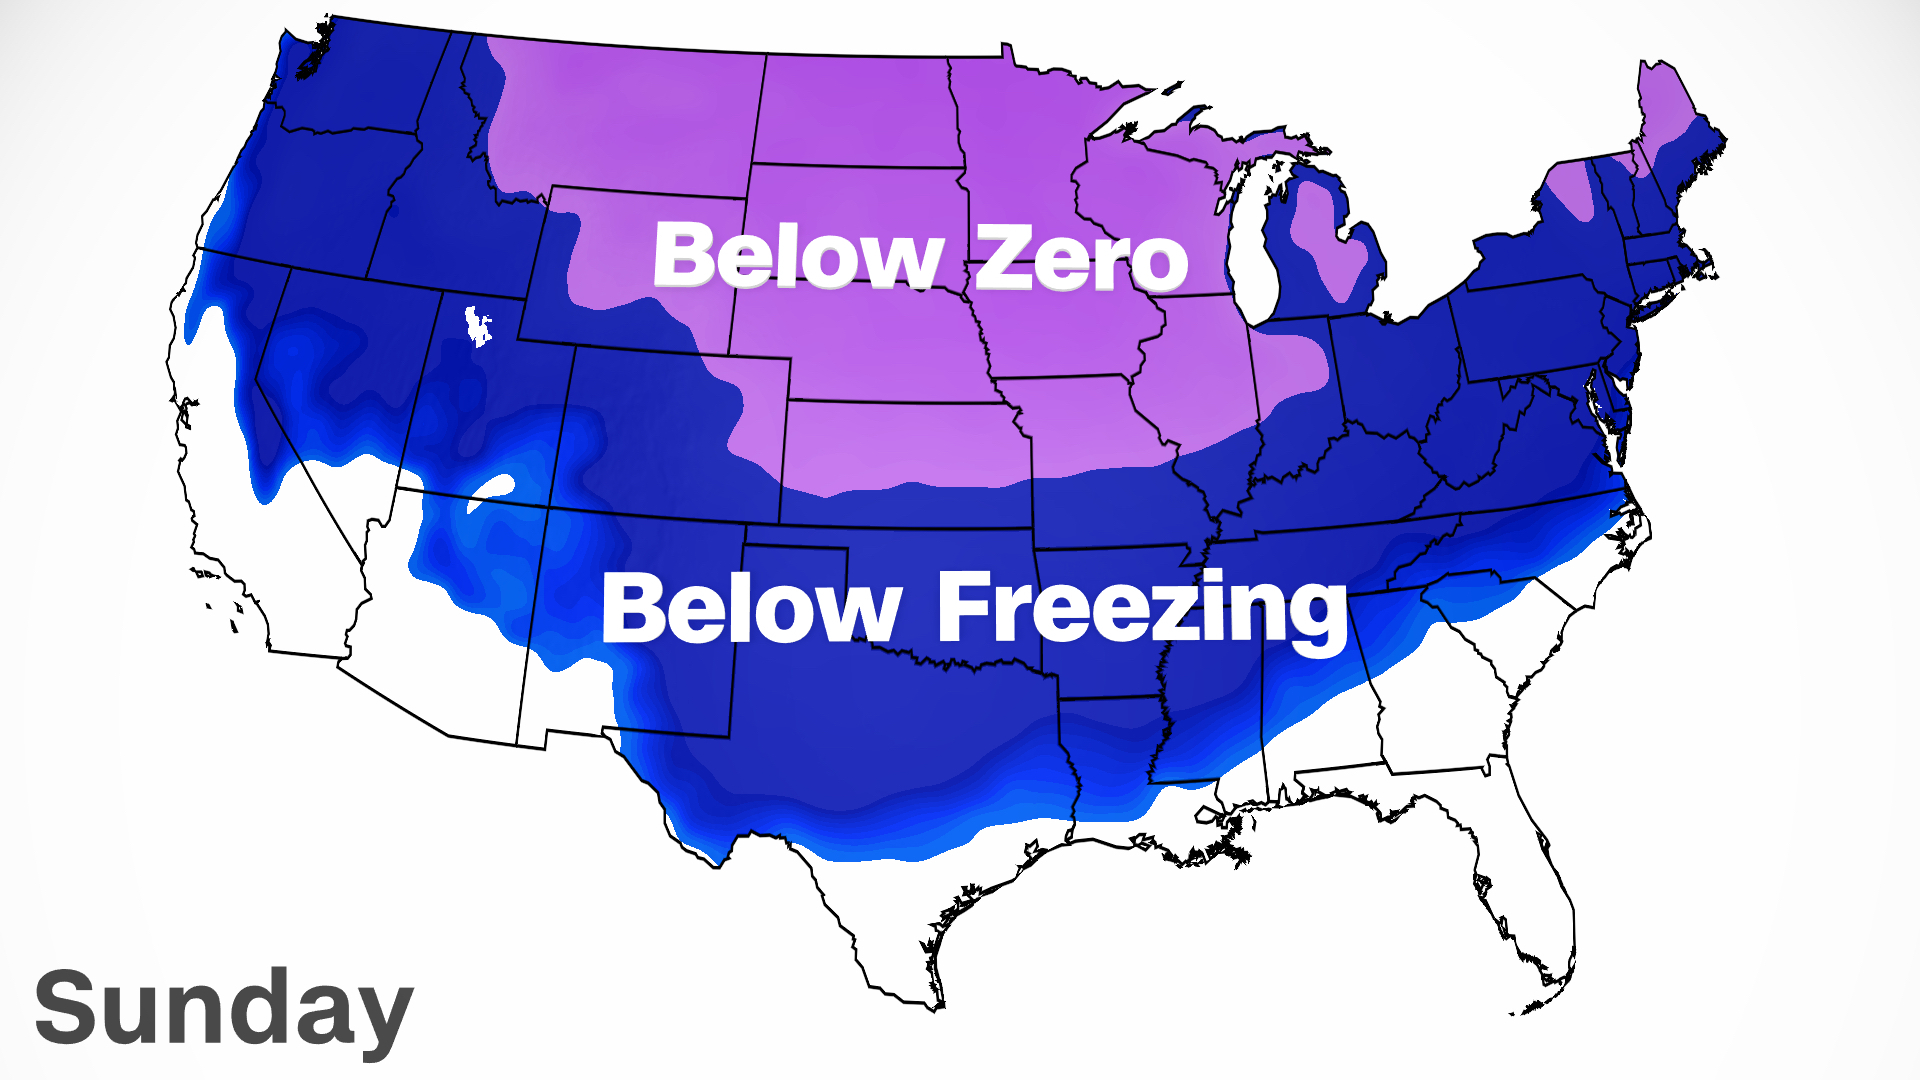 The Coldest Air in Years Is Hitting Parts of the US